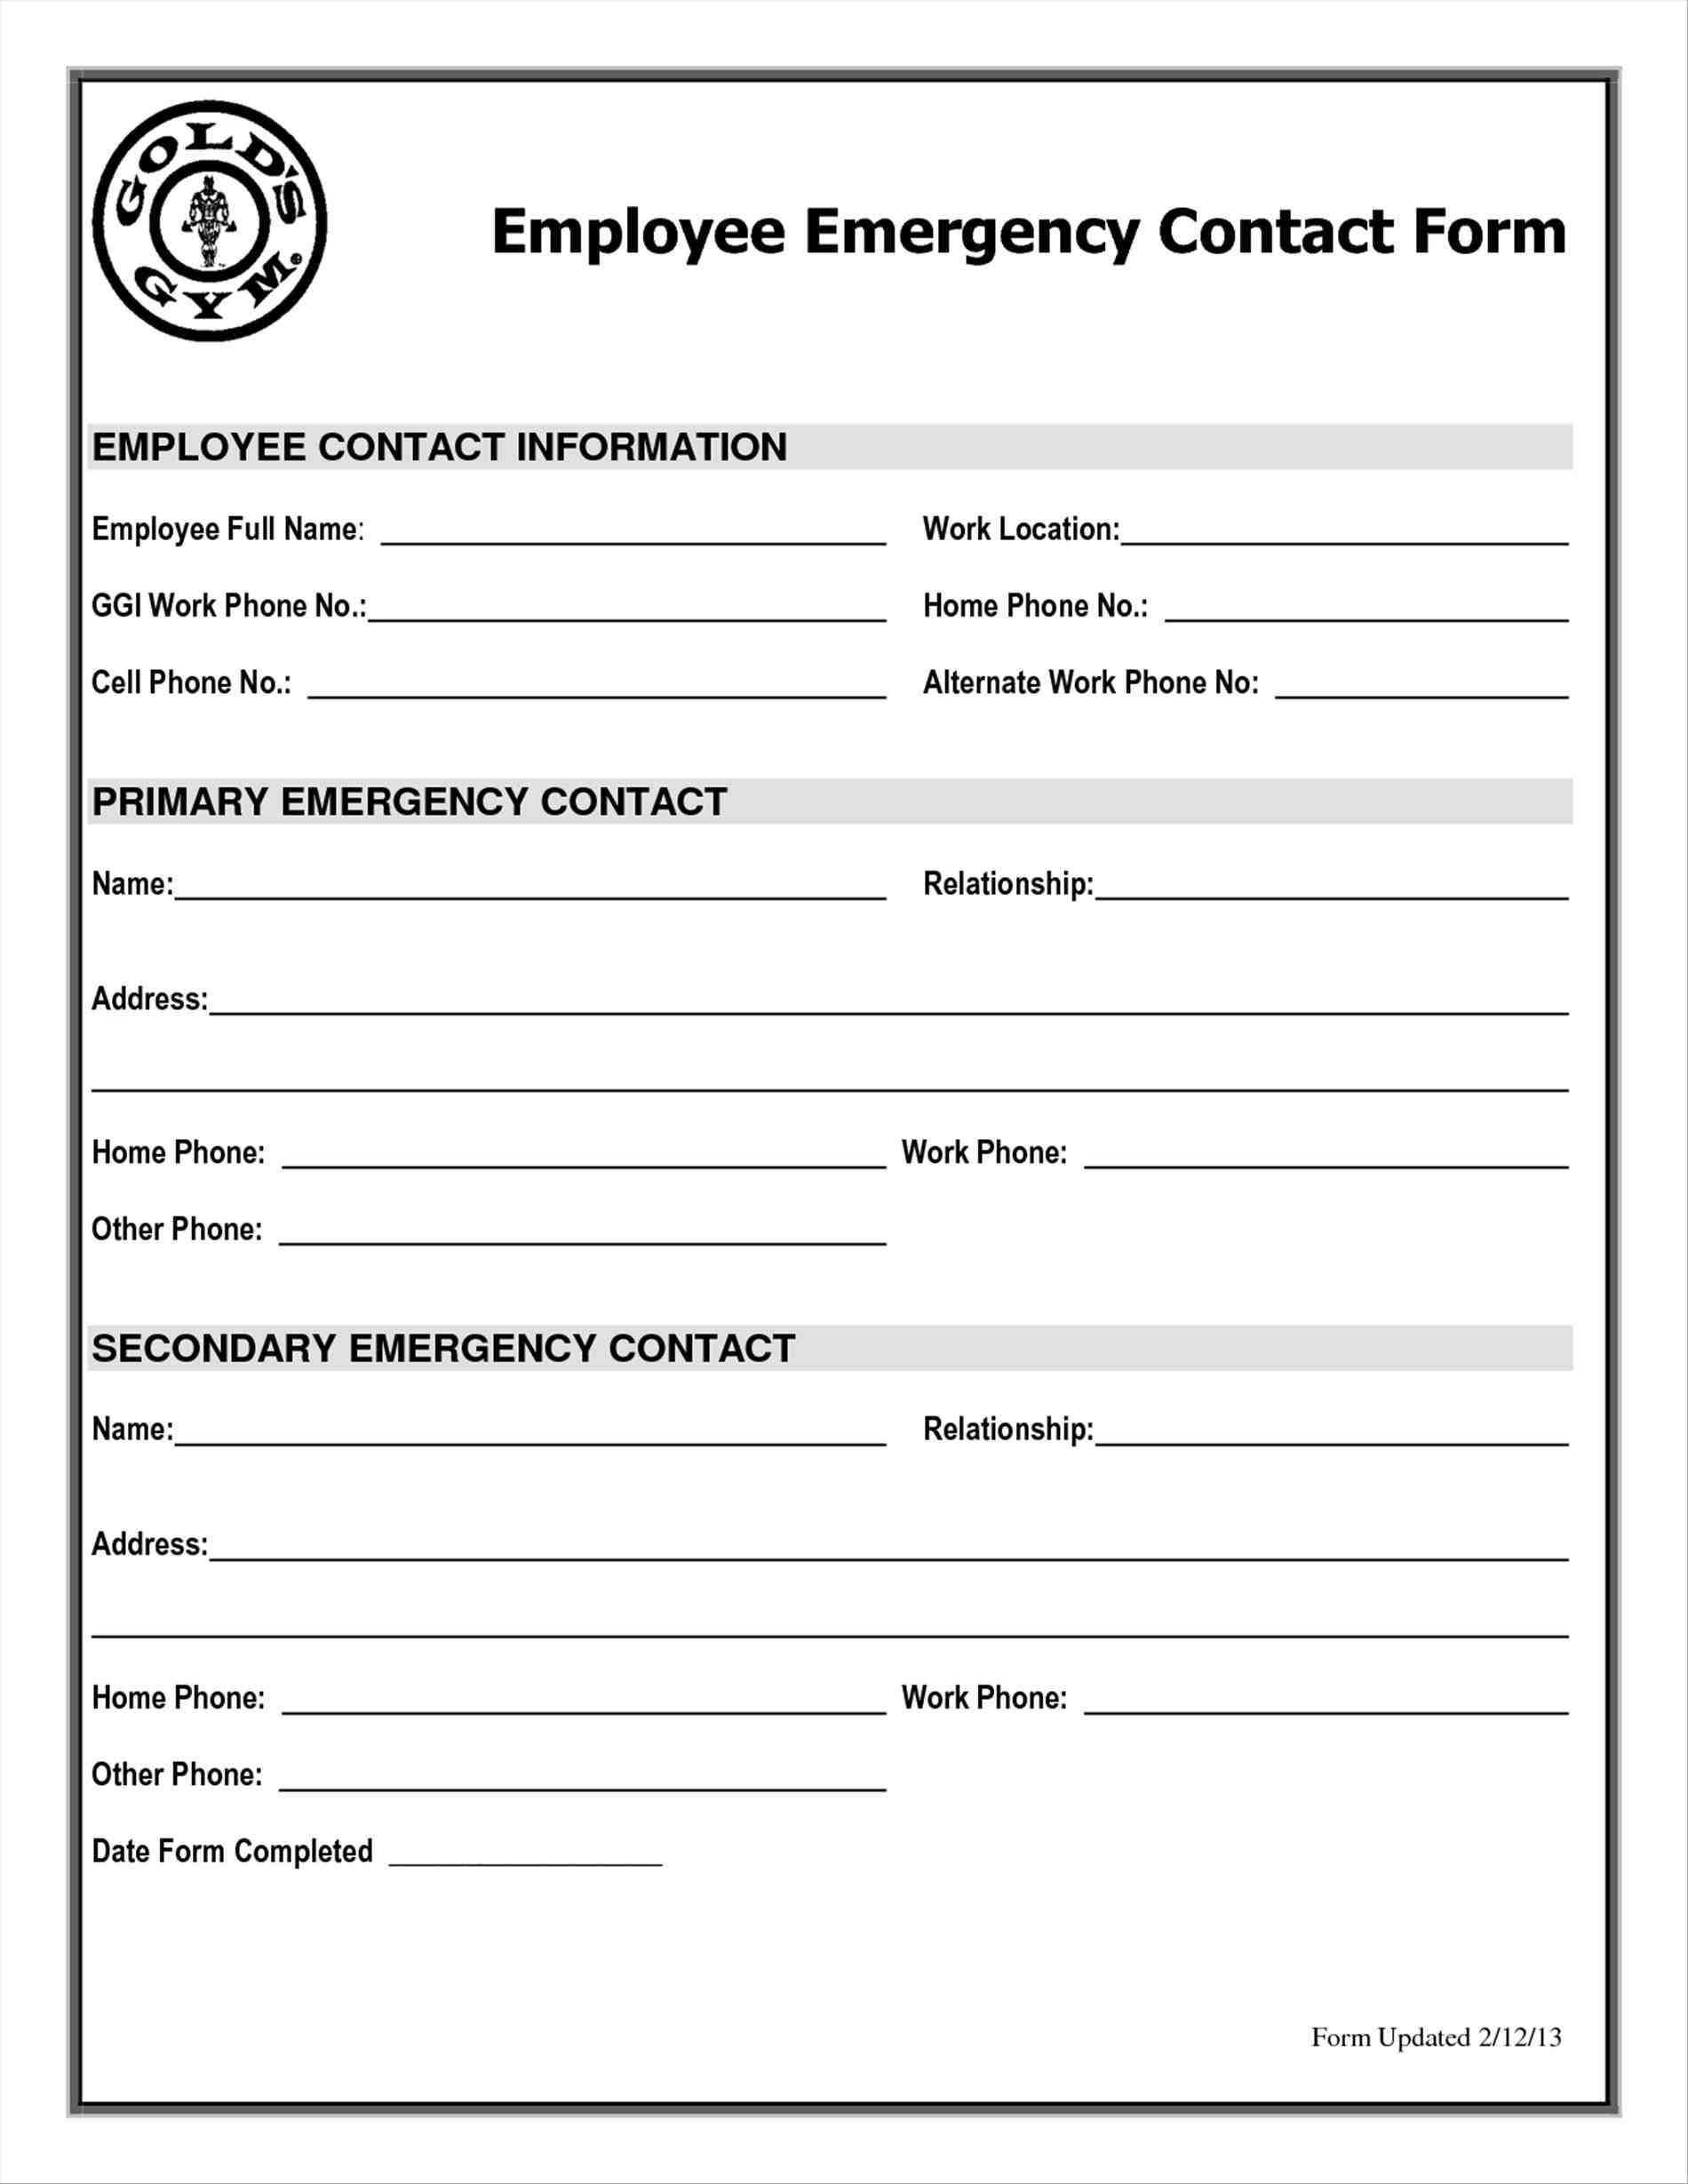 Emergency Contact Form Template Word | Dattstar Inside Emergency Contact Card Template